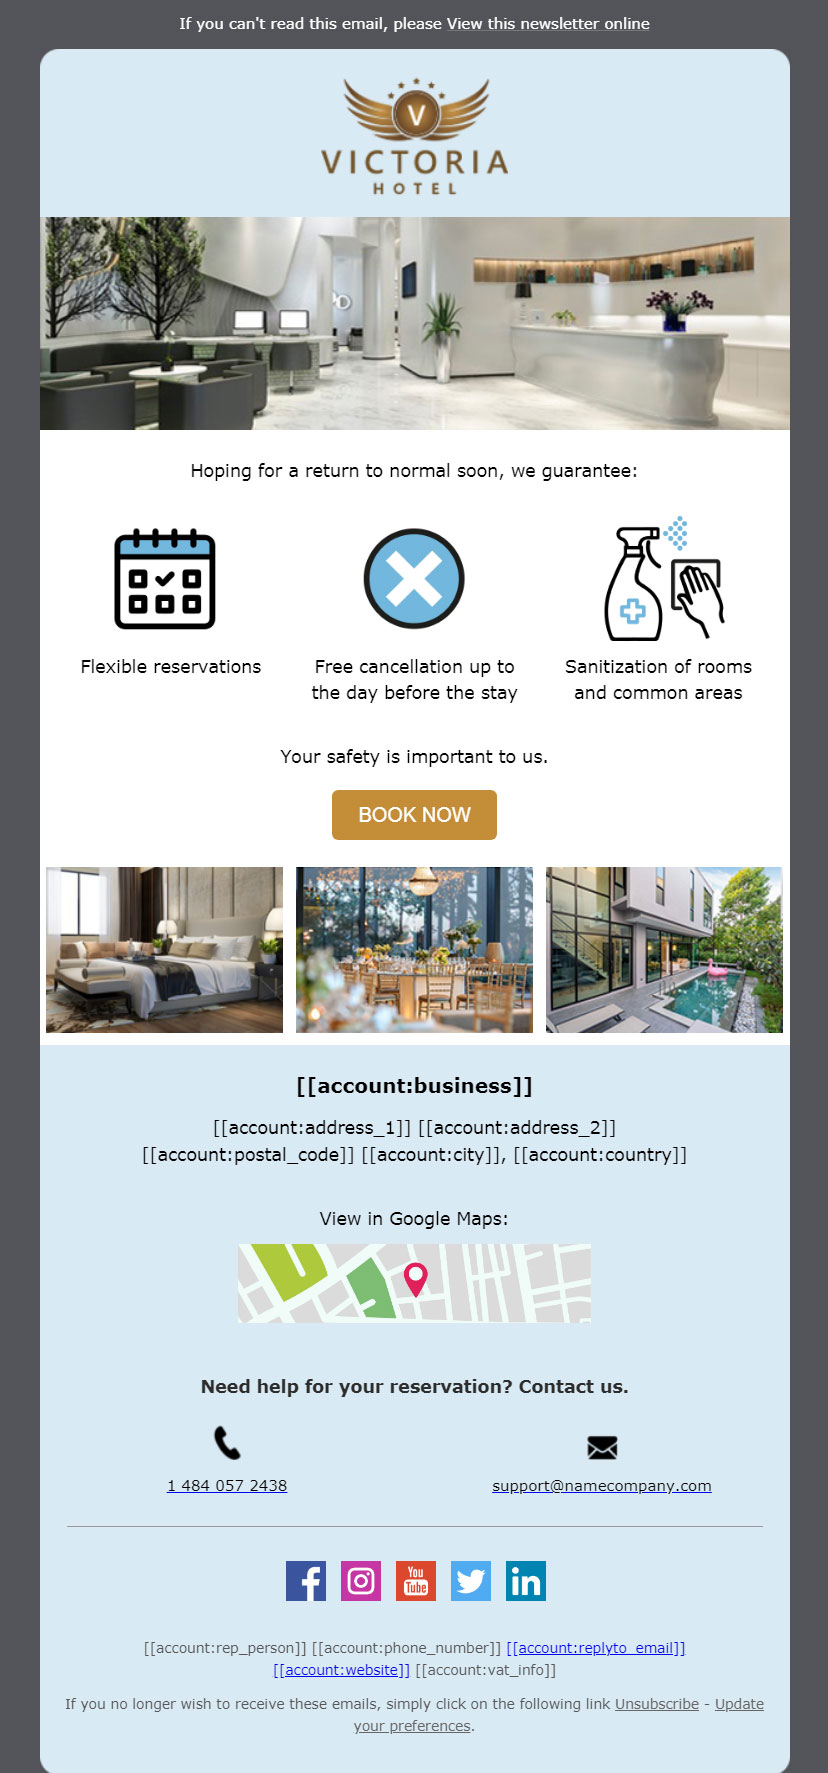 Email marketing for hotels after Covid-19